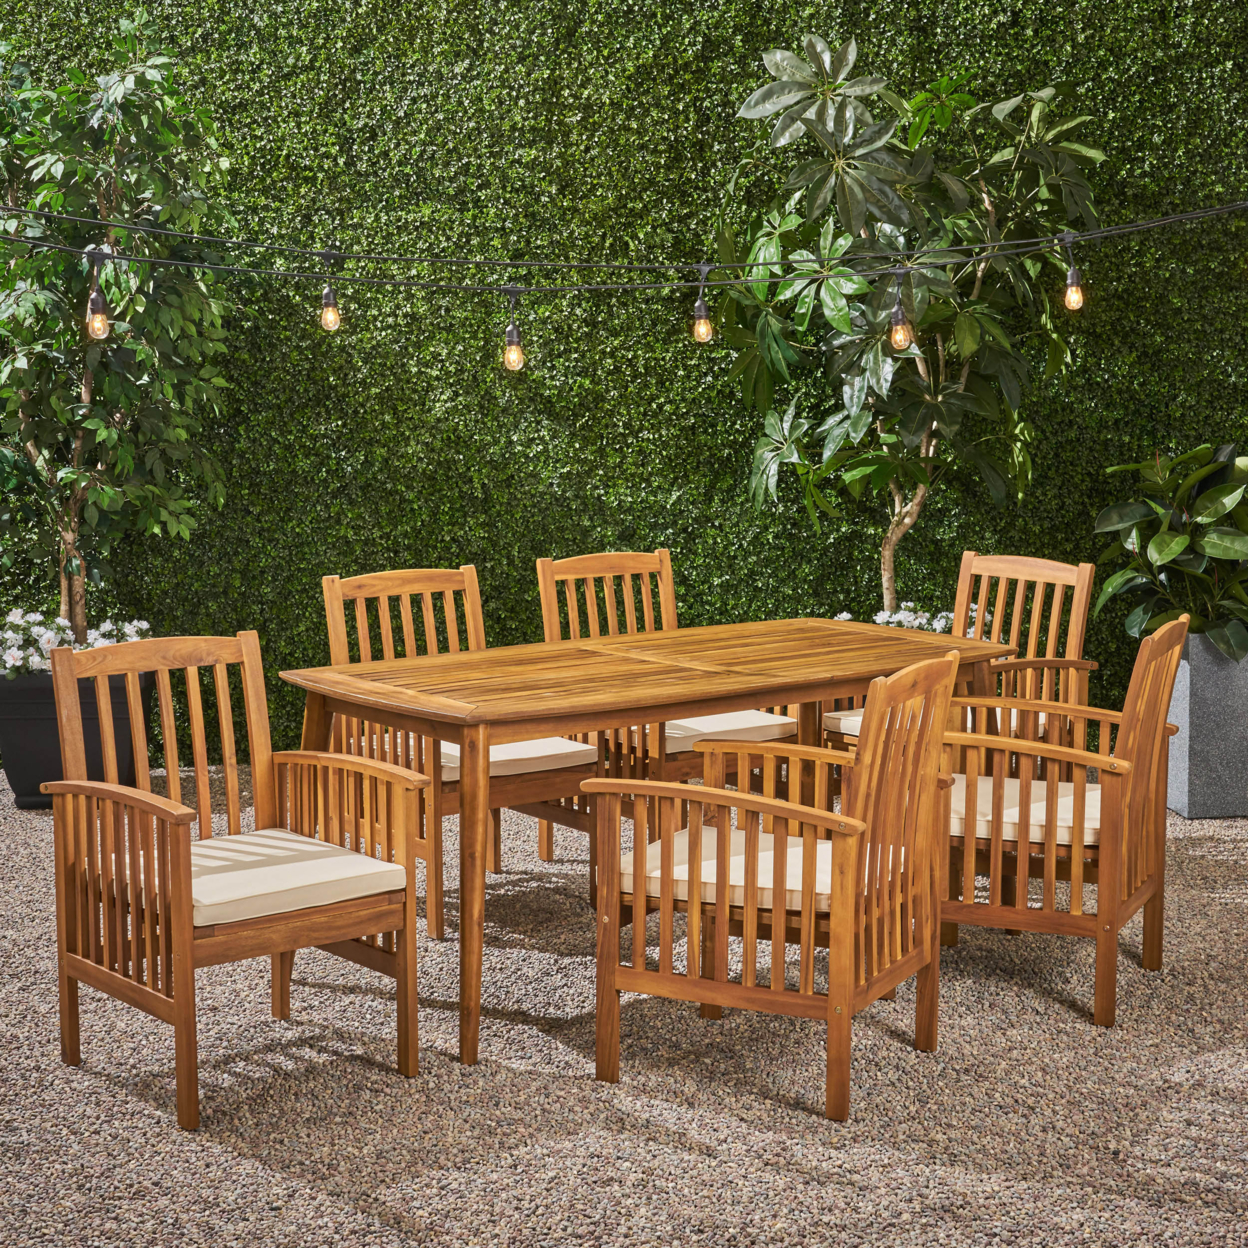 Phoenix Outdoor Acacia 6-Seater Dining Set With Cushions And 71 Rectangular Table With Straight Legs - Teak / Cream